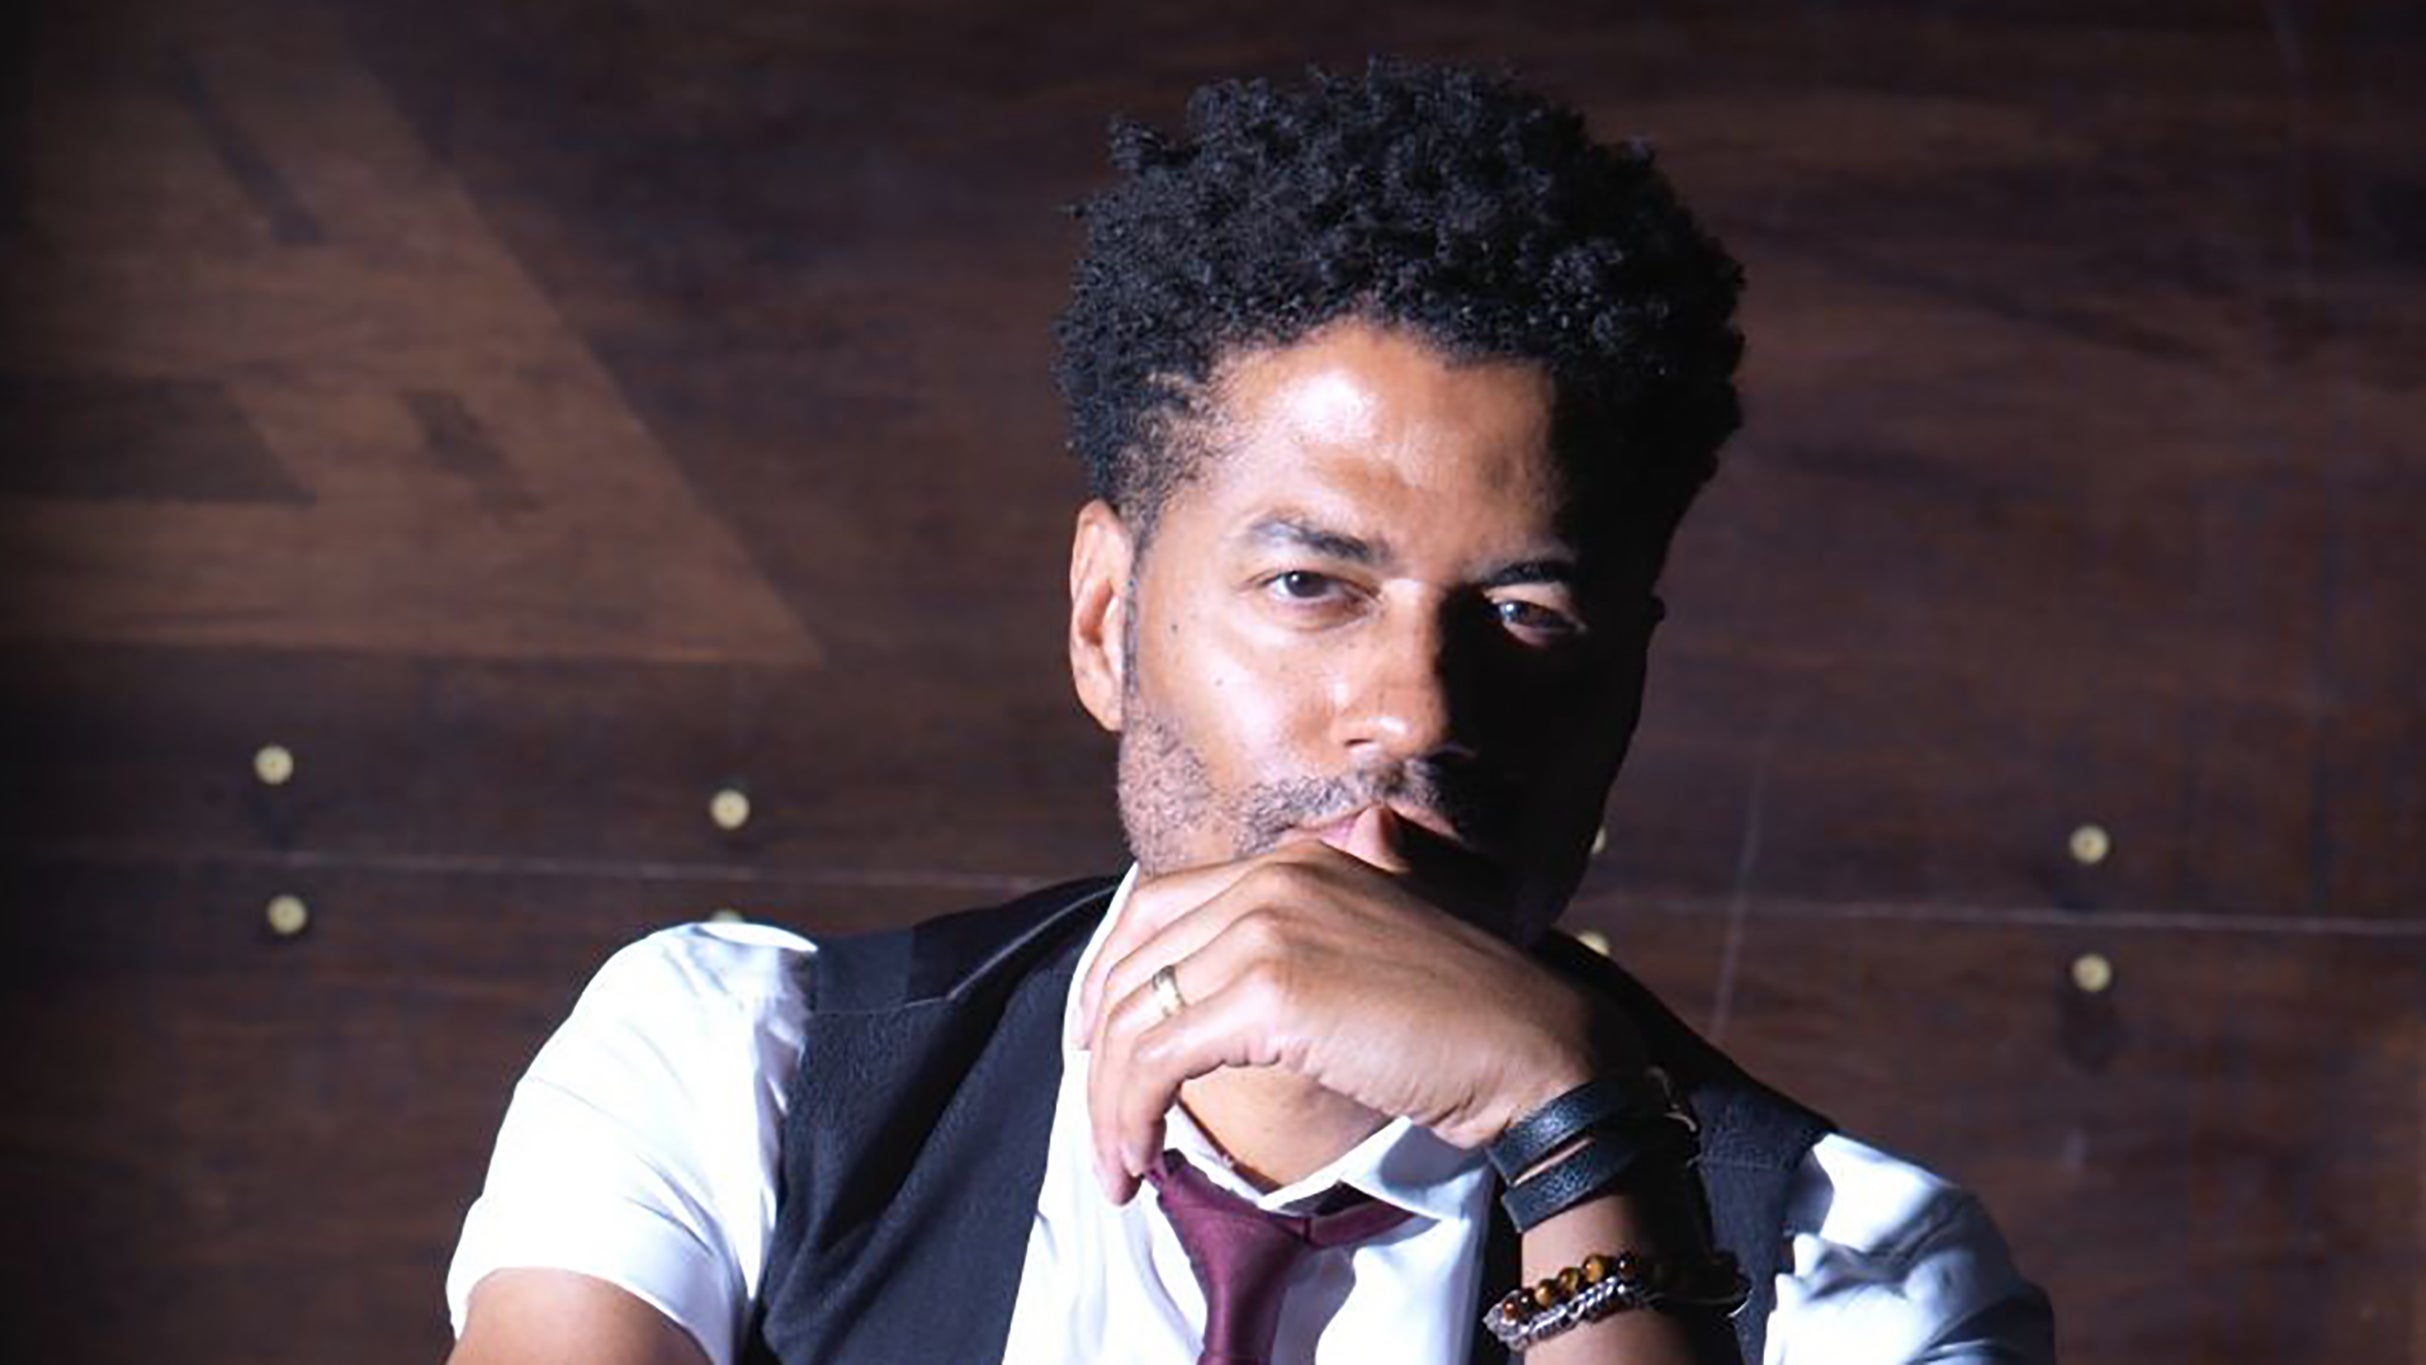 Eric Benet at Sound Board at MotorCity Casino Hotel